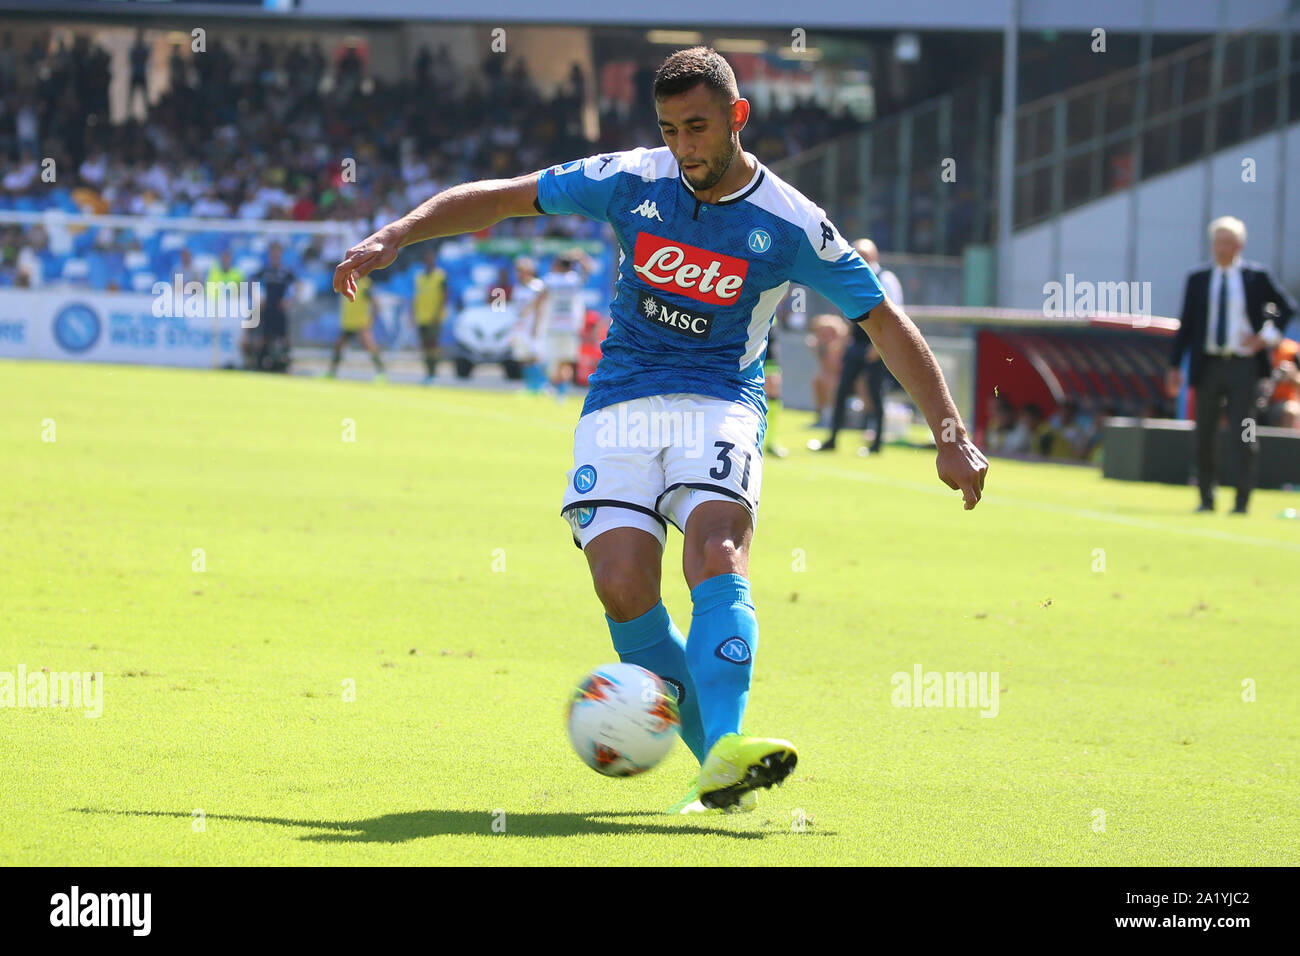 Napoli, Italy. 29th Sep, 2019. Faouzi Ghoulam algerian defender ssc napoli during the Serie A football match SSC Napoli vs Brescia Calcio on September 29 2019 at the San Paolo Stadium (Photo by Antonio Balasco/Pacific Press) Credit: Pacific Press Agency/Alamy Live News Stock Photo